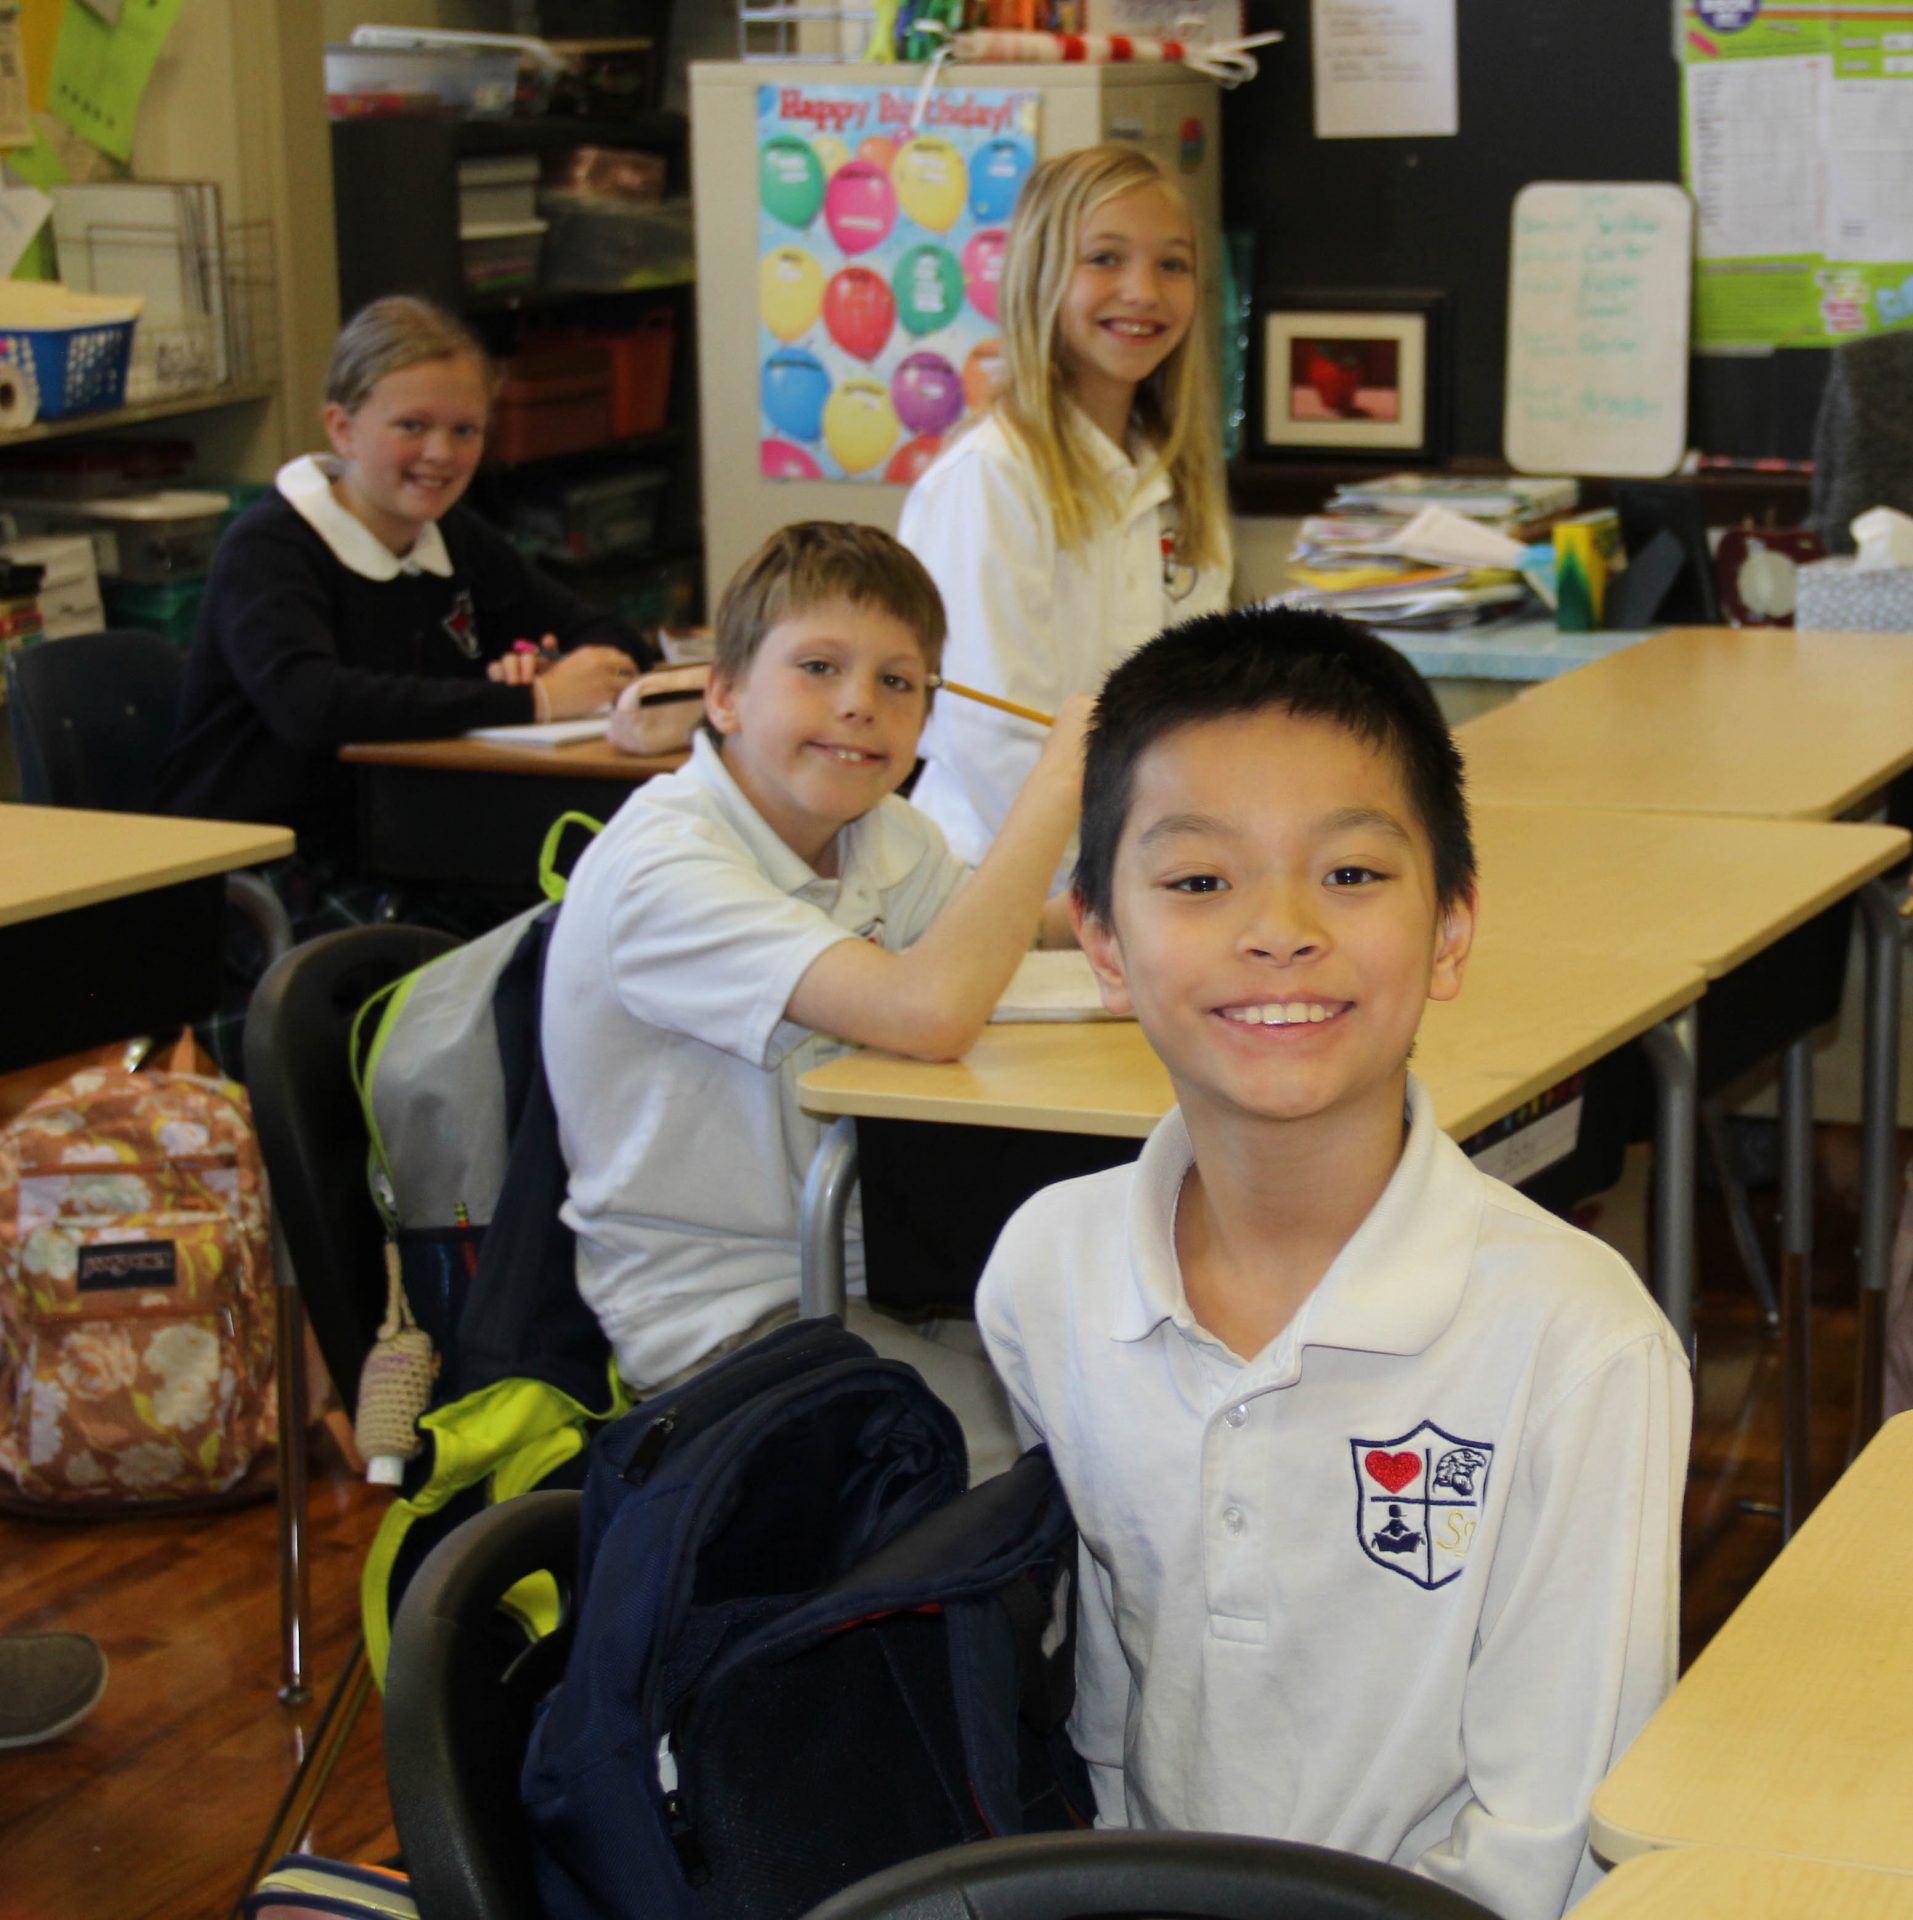 Smiling students in the classroom